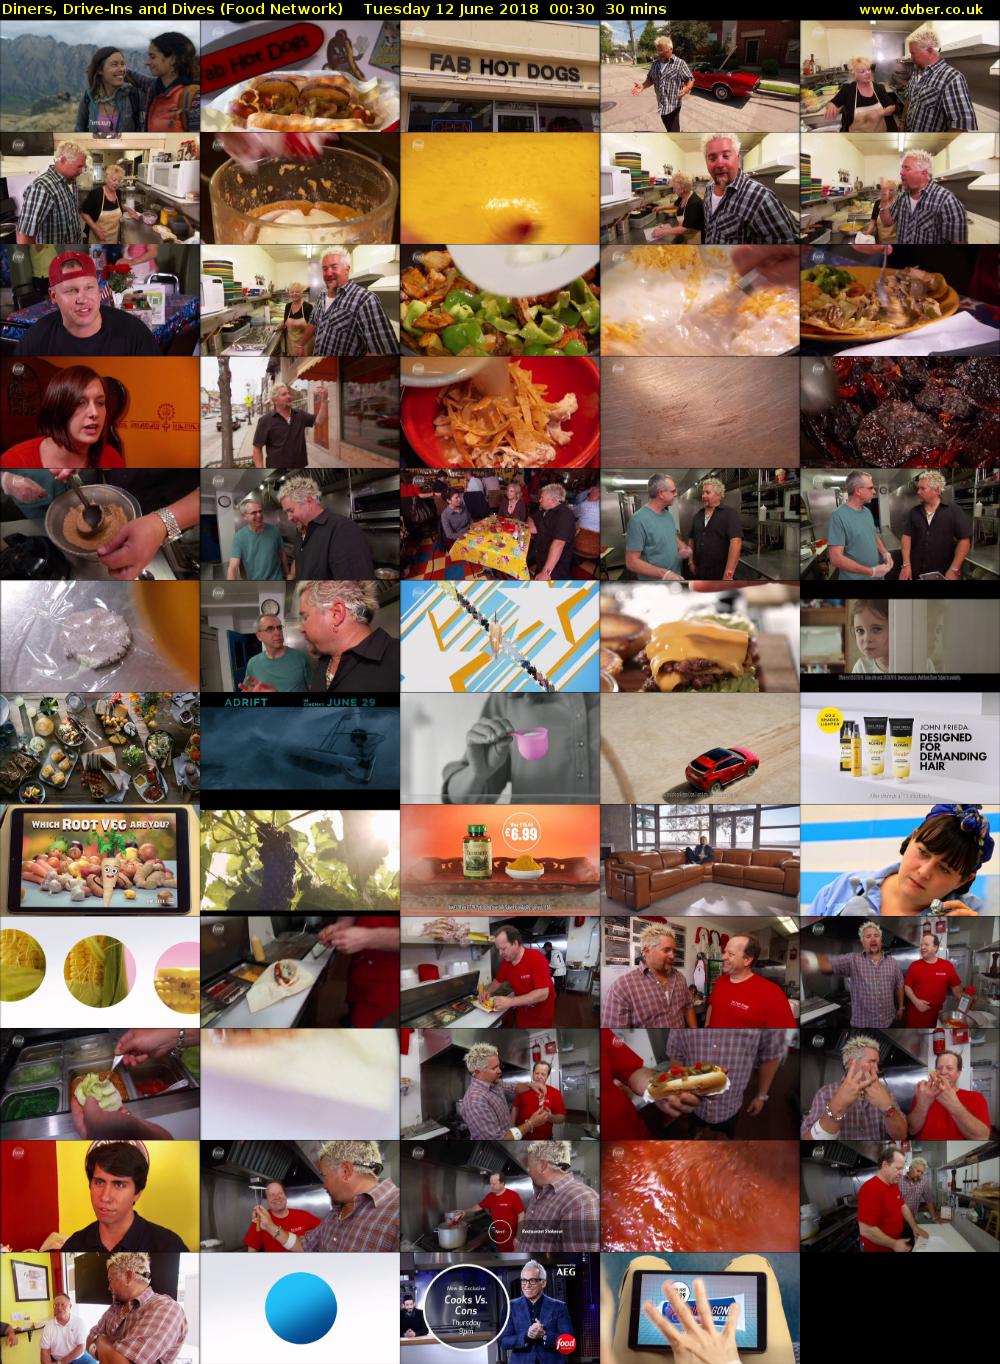 Diners, Drive-Ins and Dives (Food Network) Tuesday 12 June 2018 00:30 - 01:00